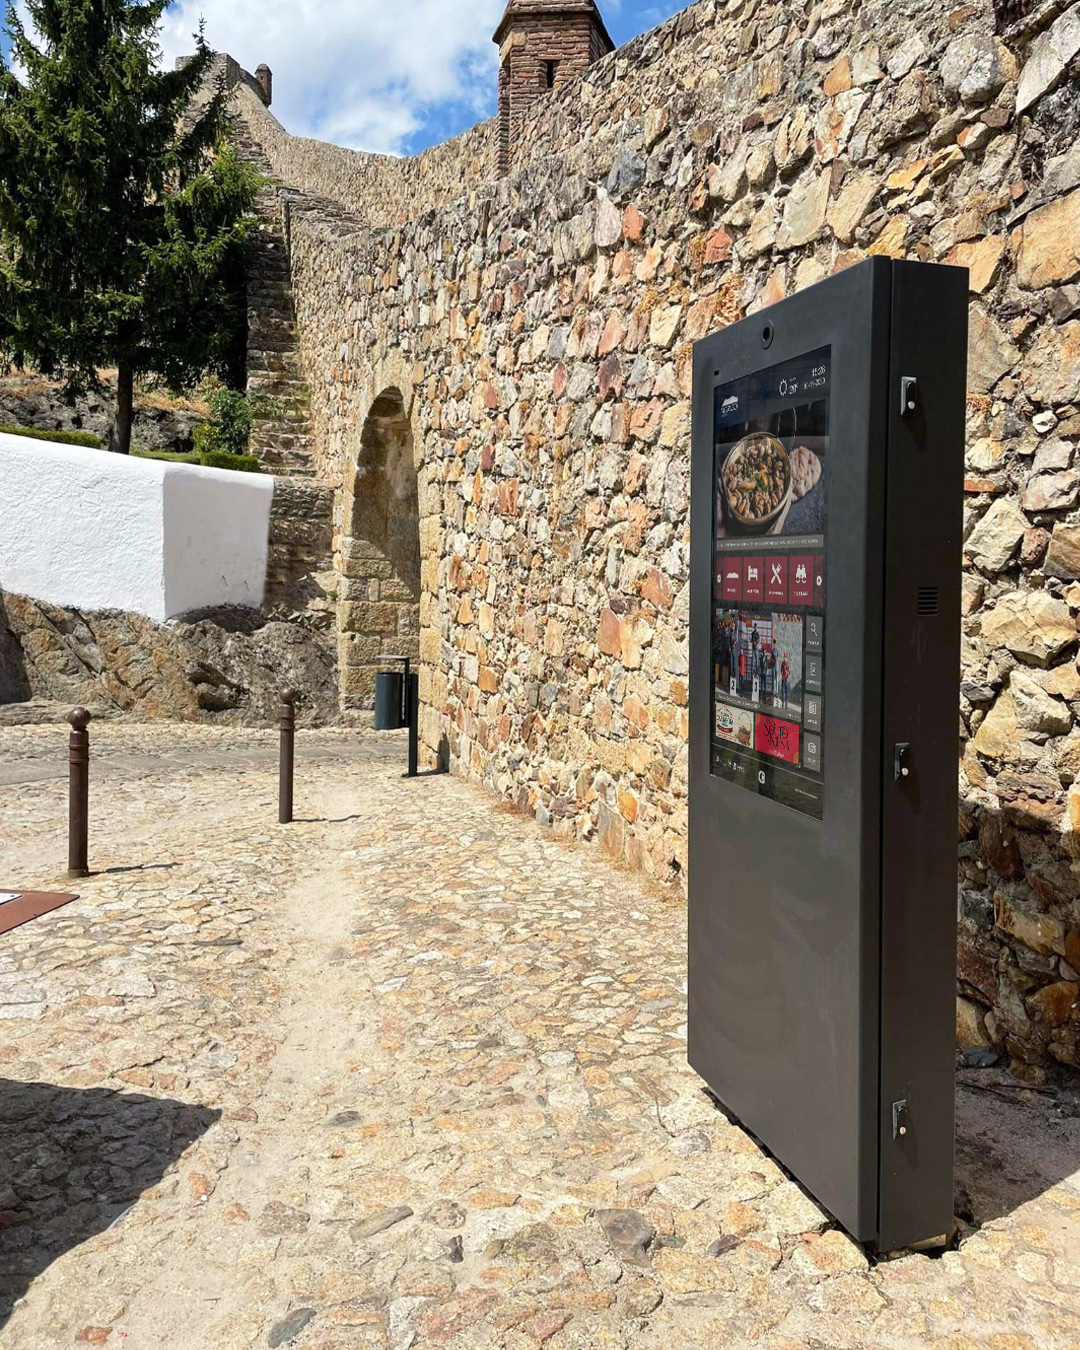 PARTTEAM & OEMKIOSKS produced PLASMV digital billboards to support tourism and citizens in the town of Marvão